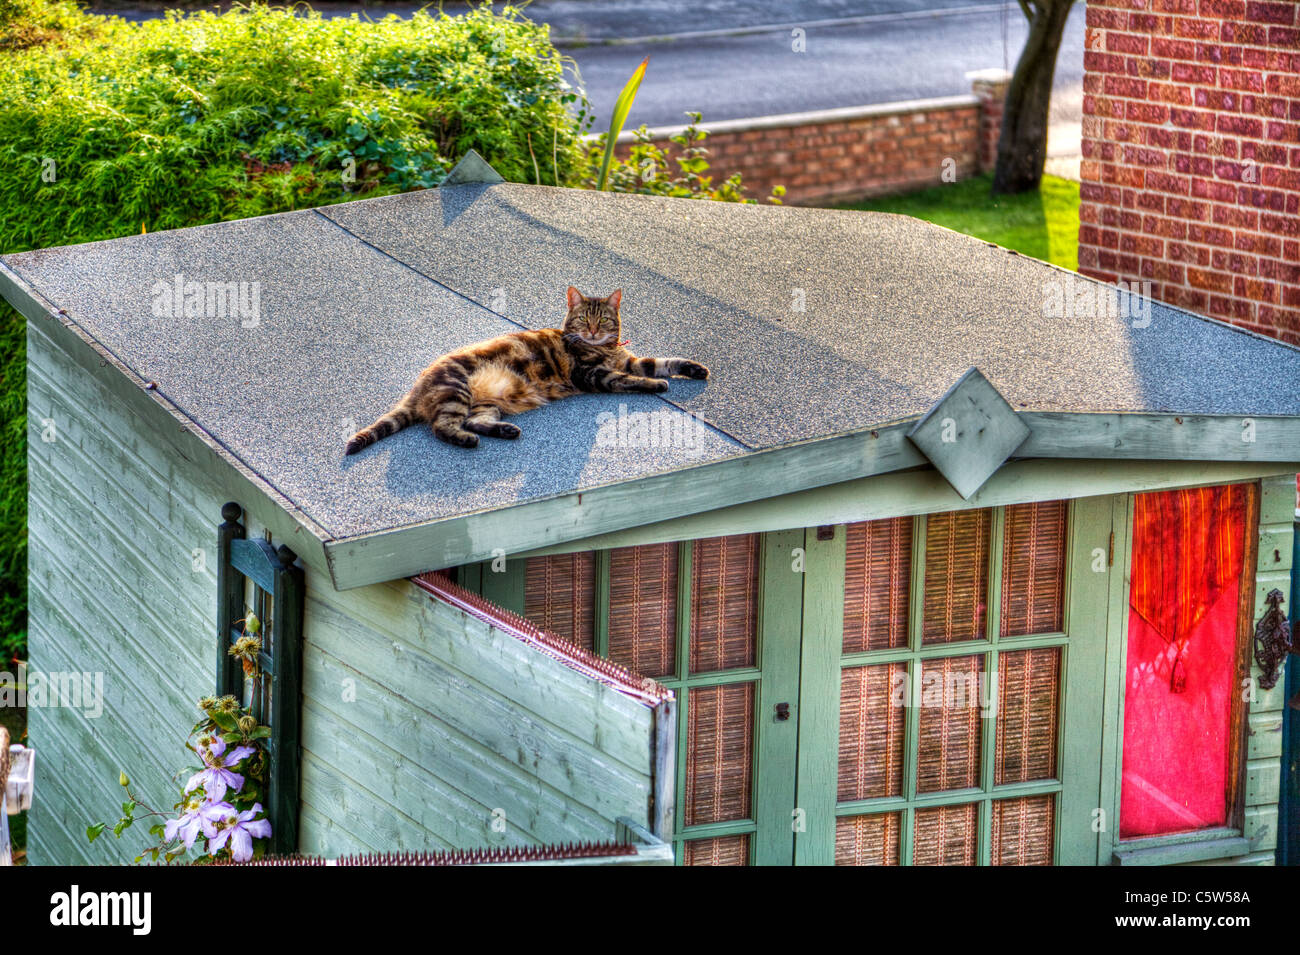 HDR image of a tabby cat on a summer house, shed roof lazing in the sun looking at the camera, eye contact Stock Photo